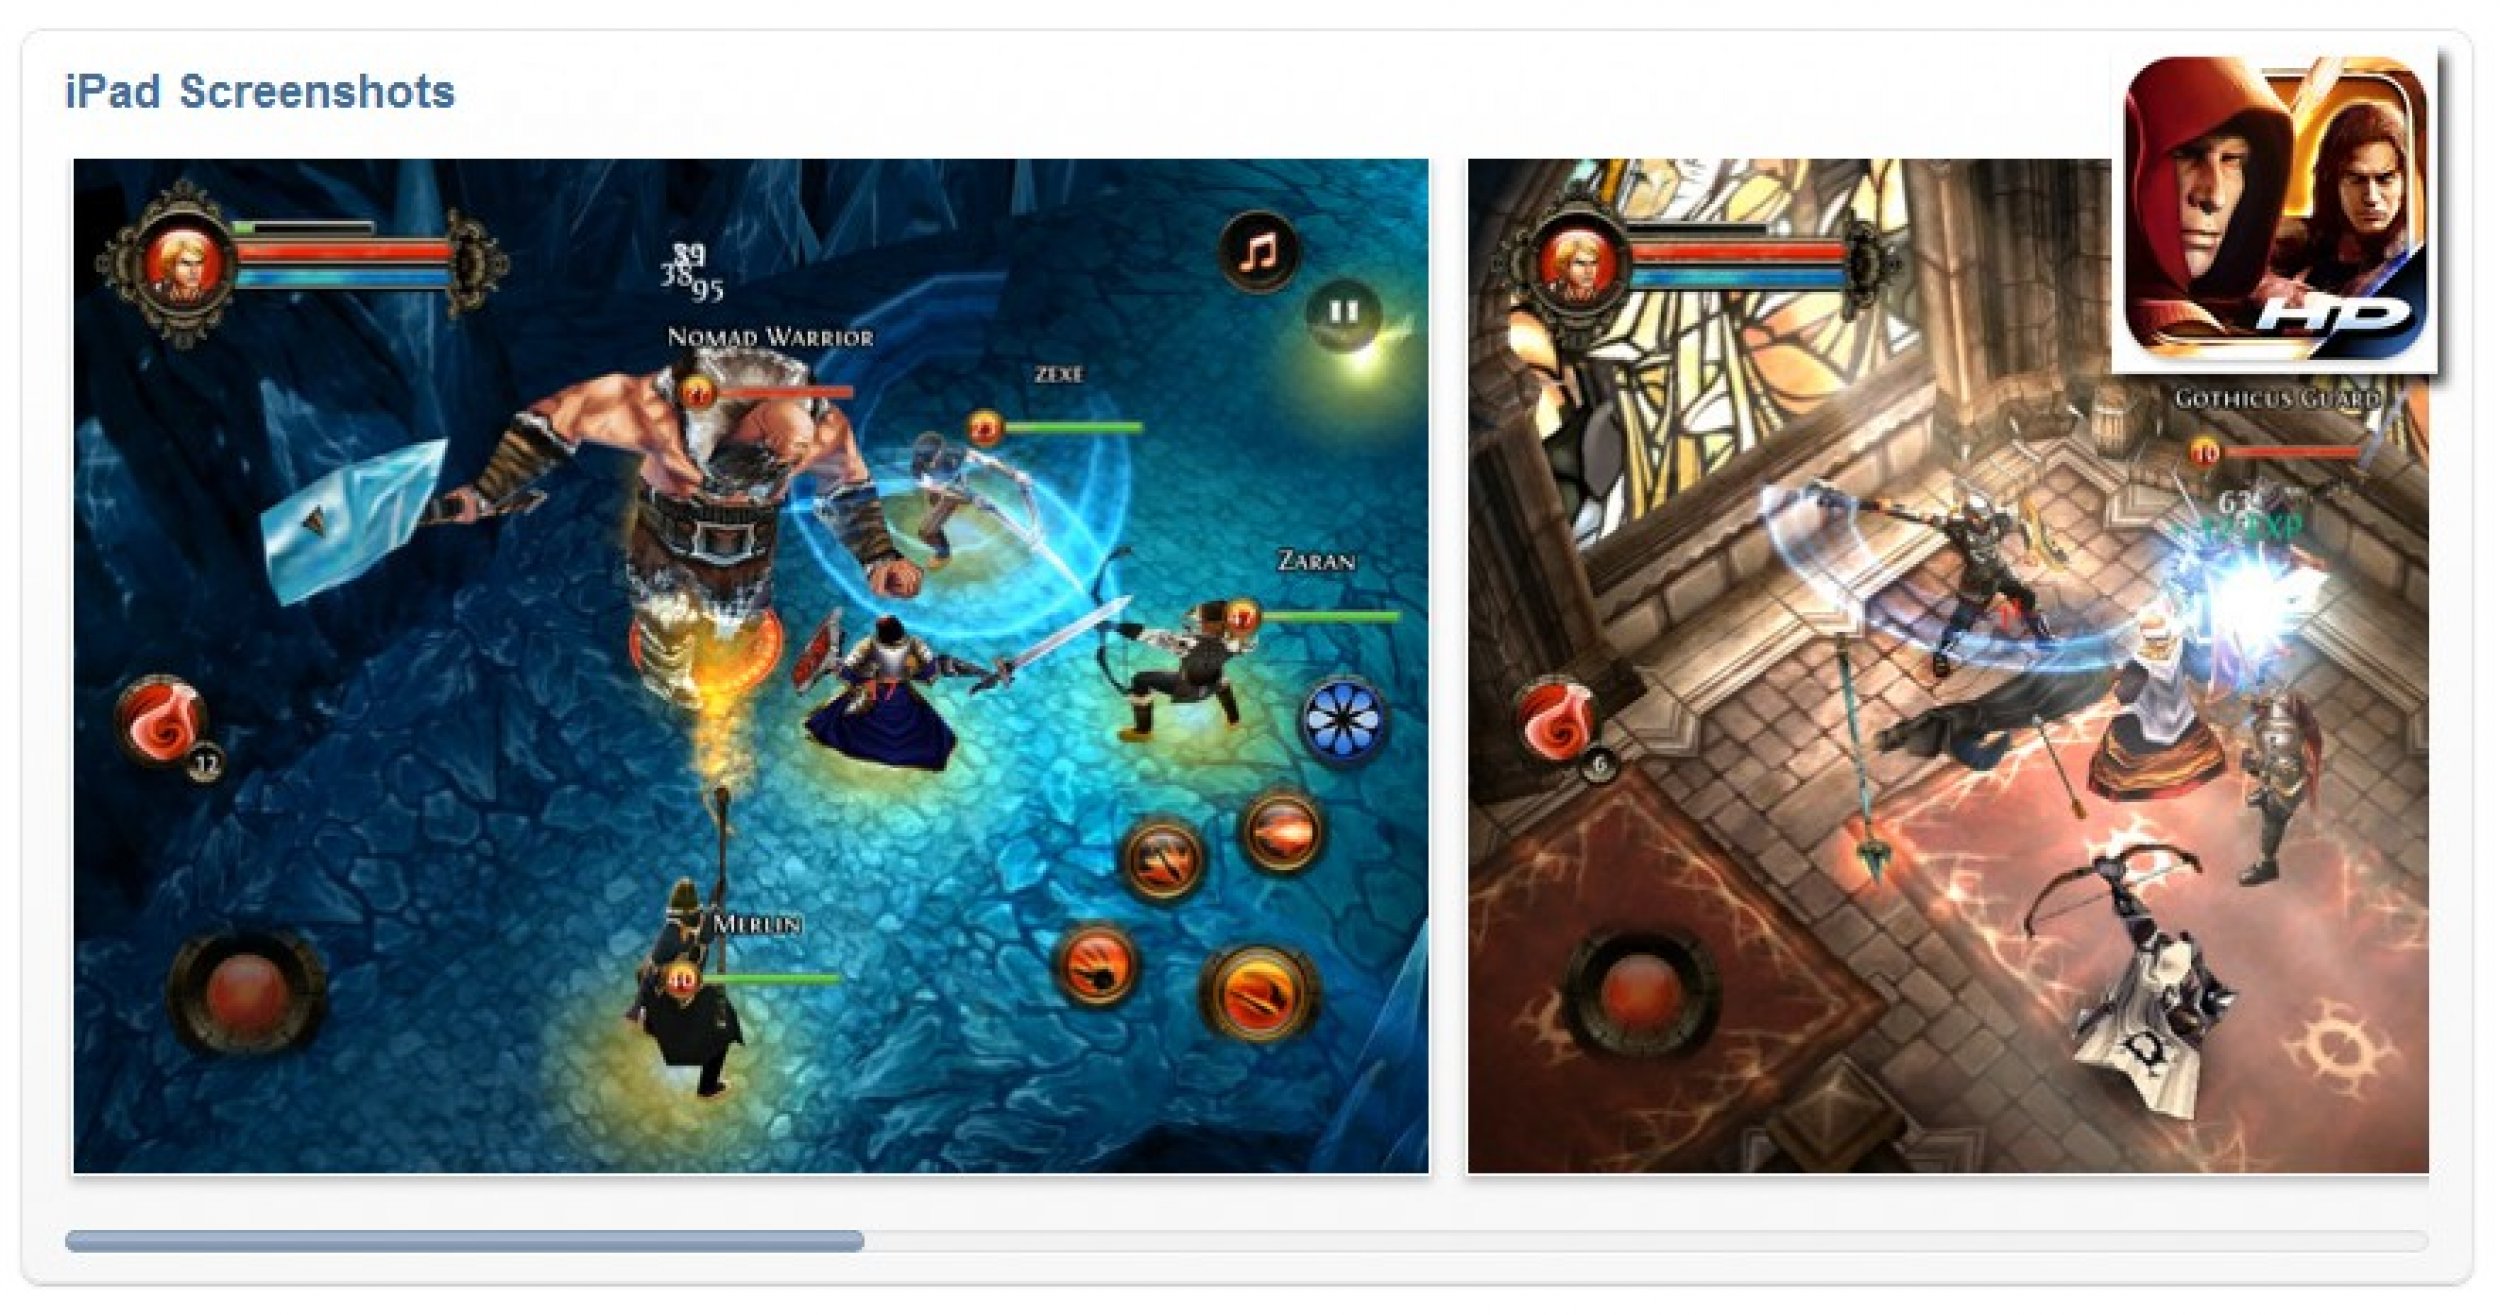 Dungeon Hunter Game - Top 50 must-have iPad apps